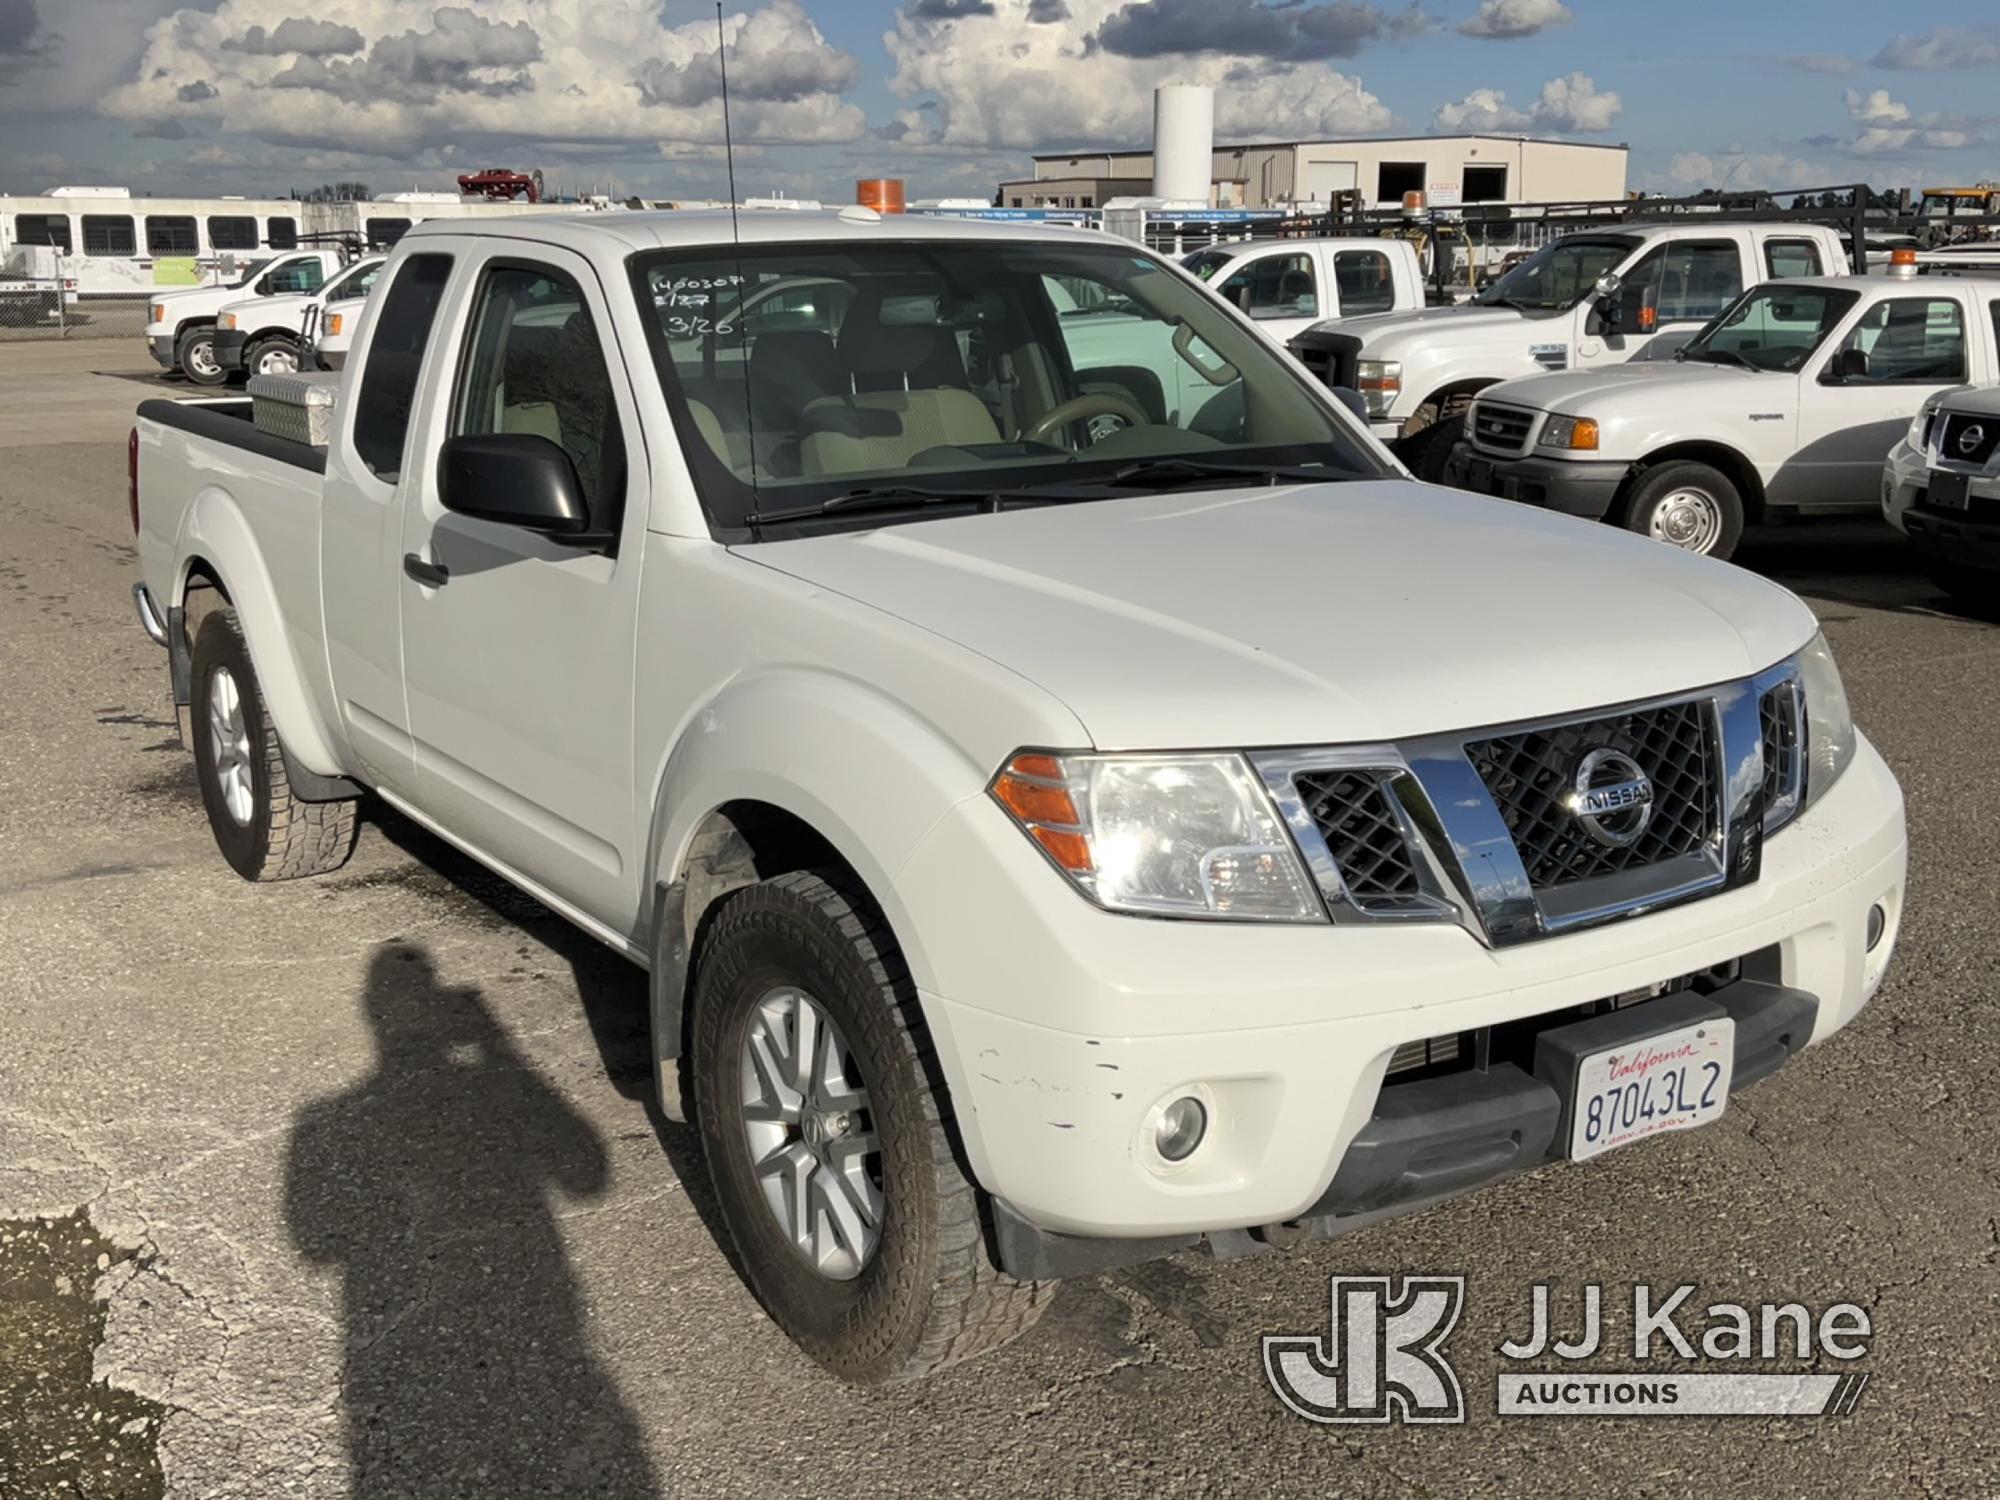 (Dixon, CA) 2017 Nissan Frontier 4x4 Extended-Cab Pickup Truck Runs & Moves